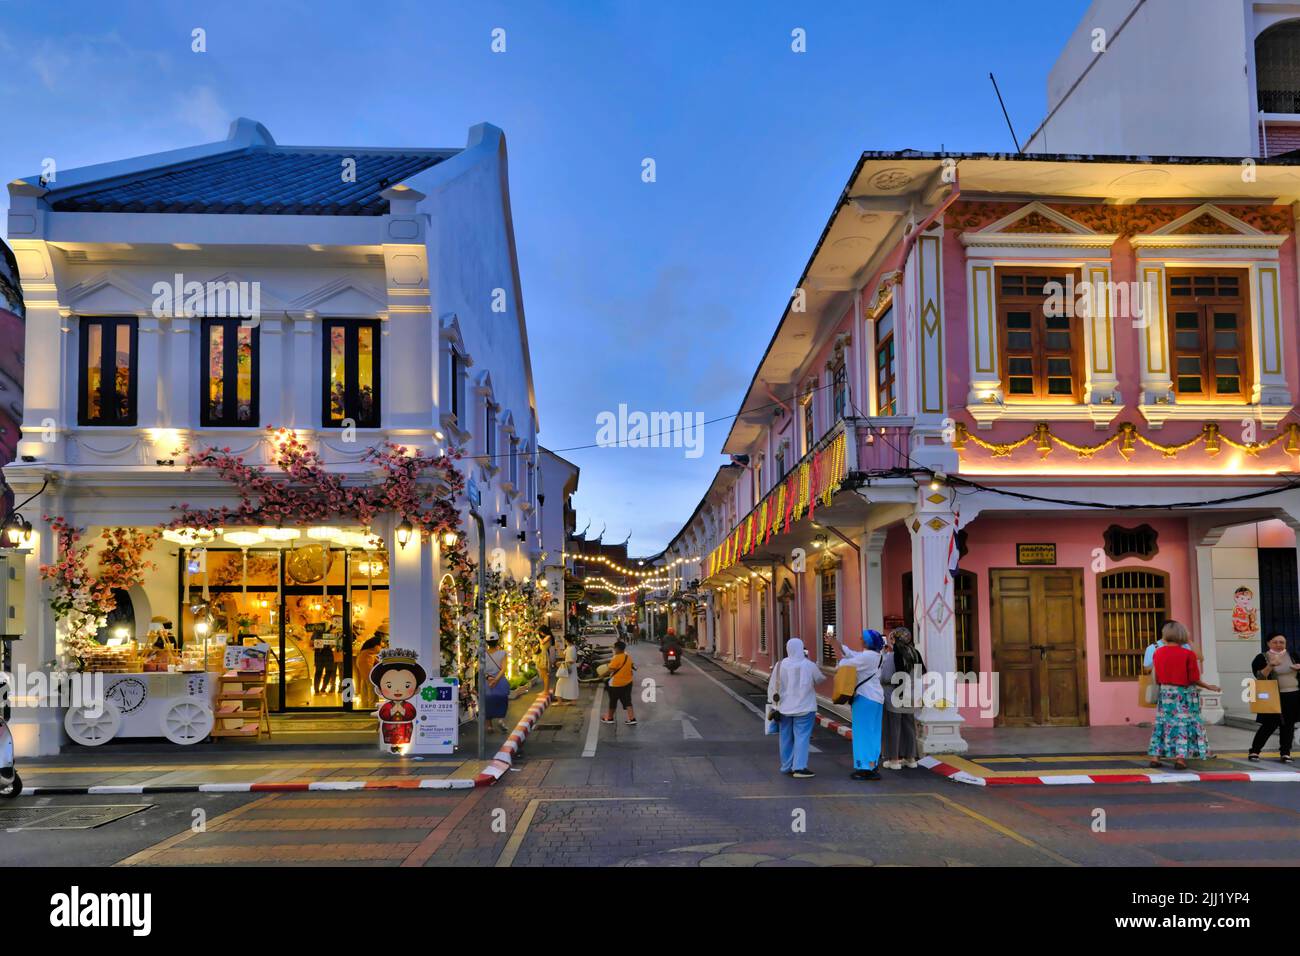 Dusk falls over the picturesque Sino-Portuguese or Peranakan shophouses in Thalang Road in the Old Town heritage area of Phuket Town, Phuket, Thailand Stock Photo